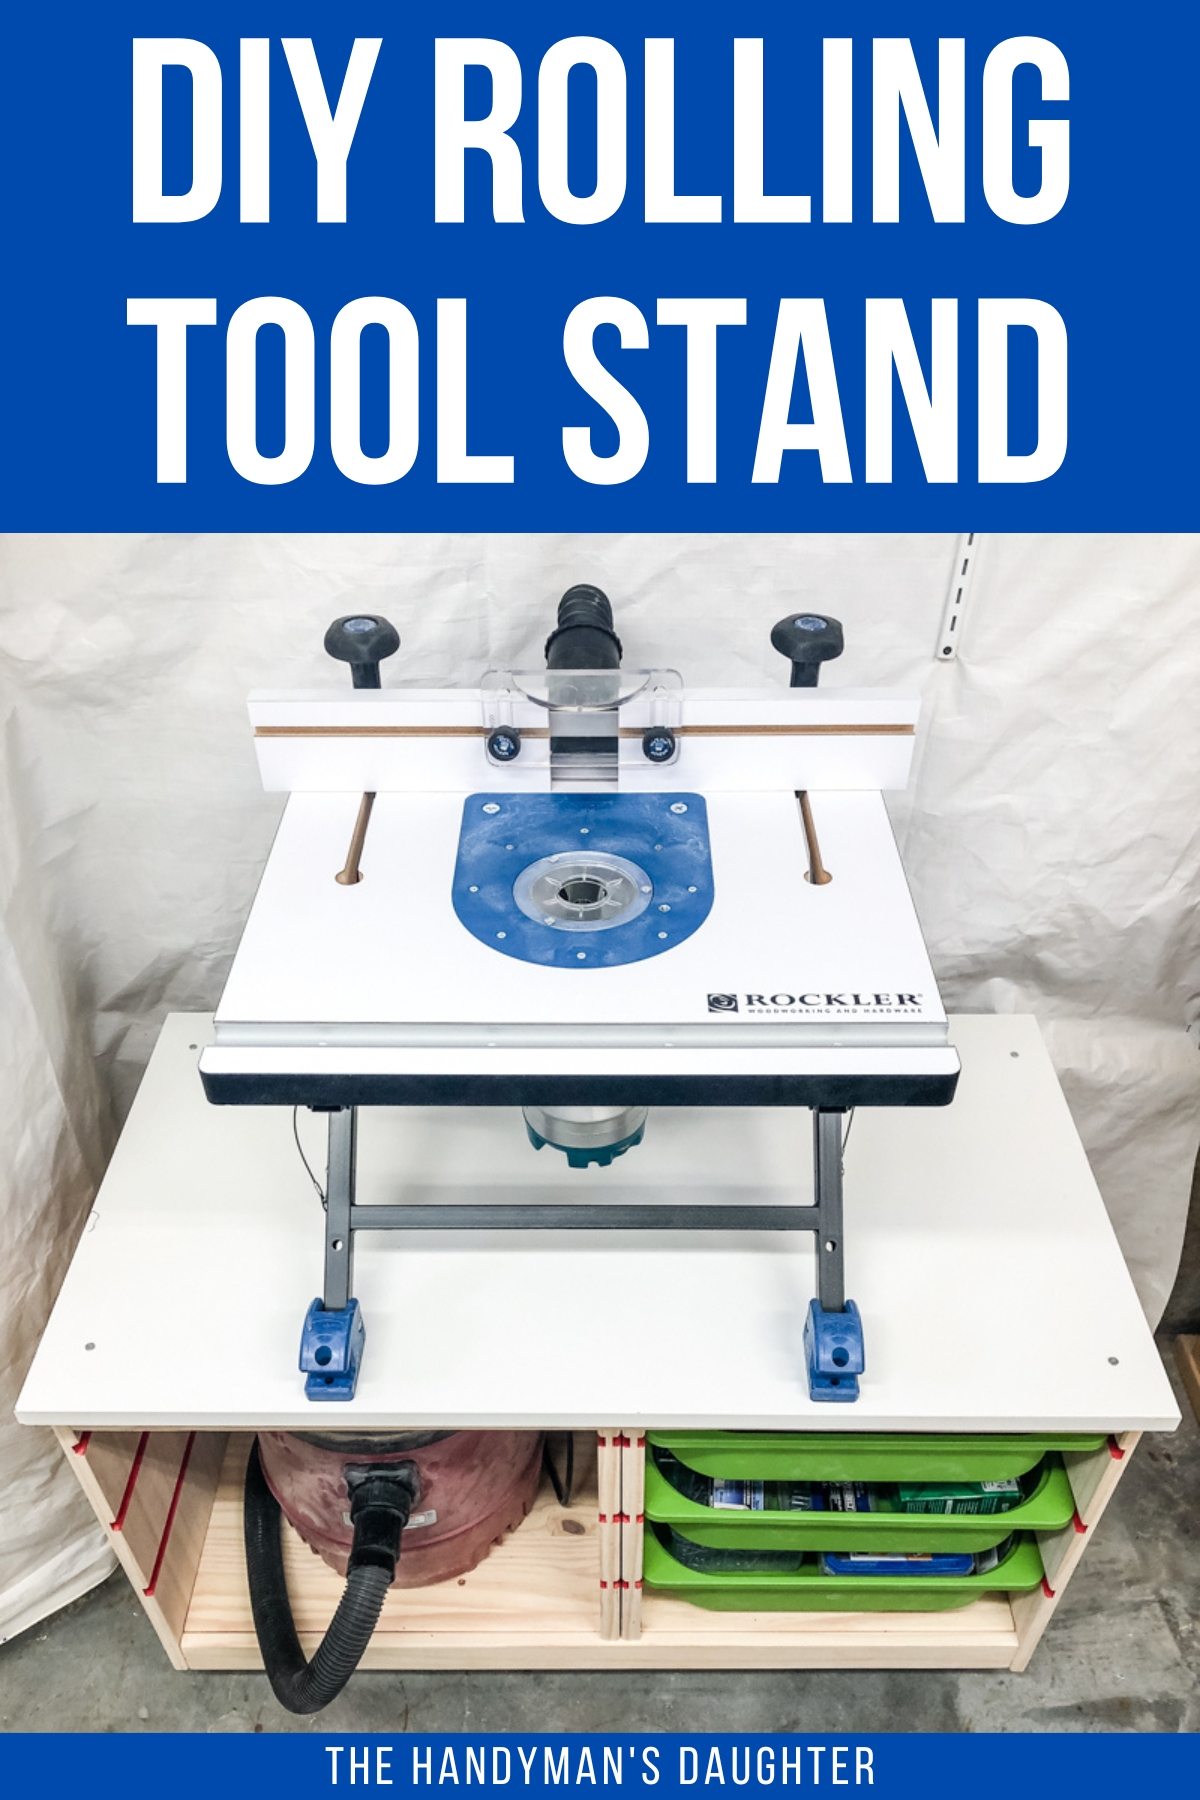 DIY rolling benchtop tool stand made from IKEA Trofast